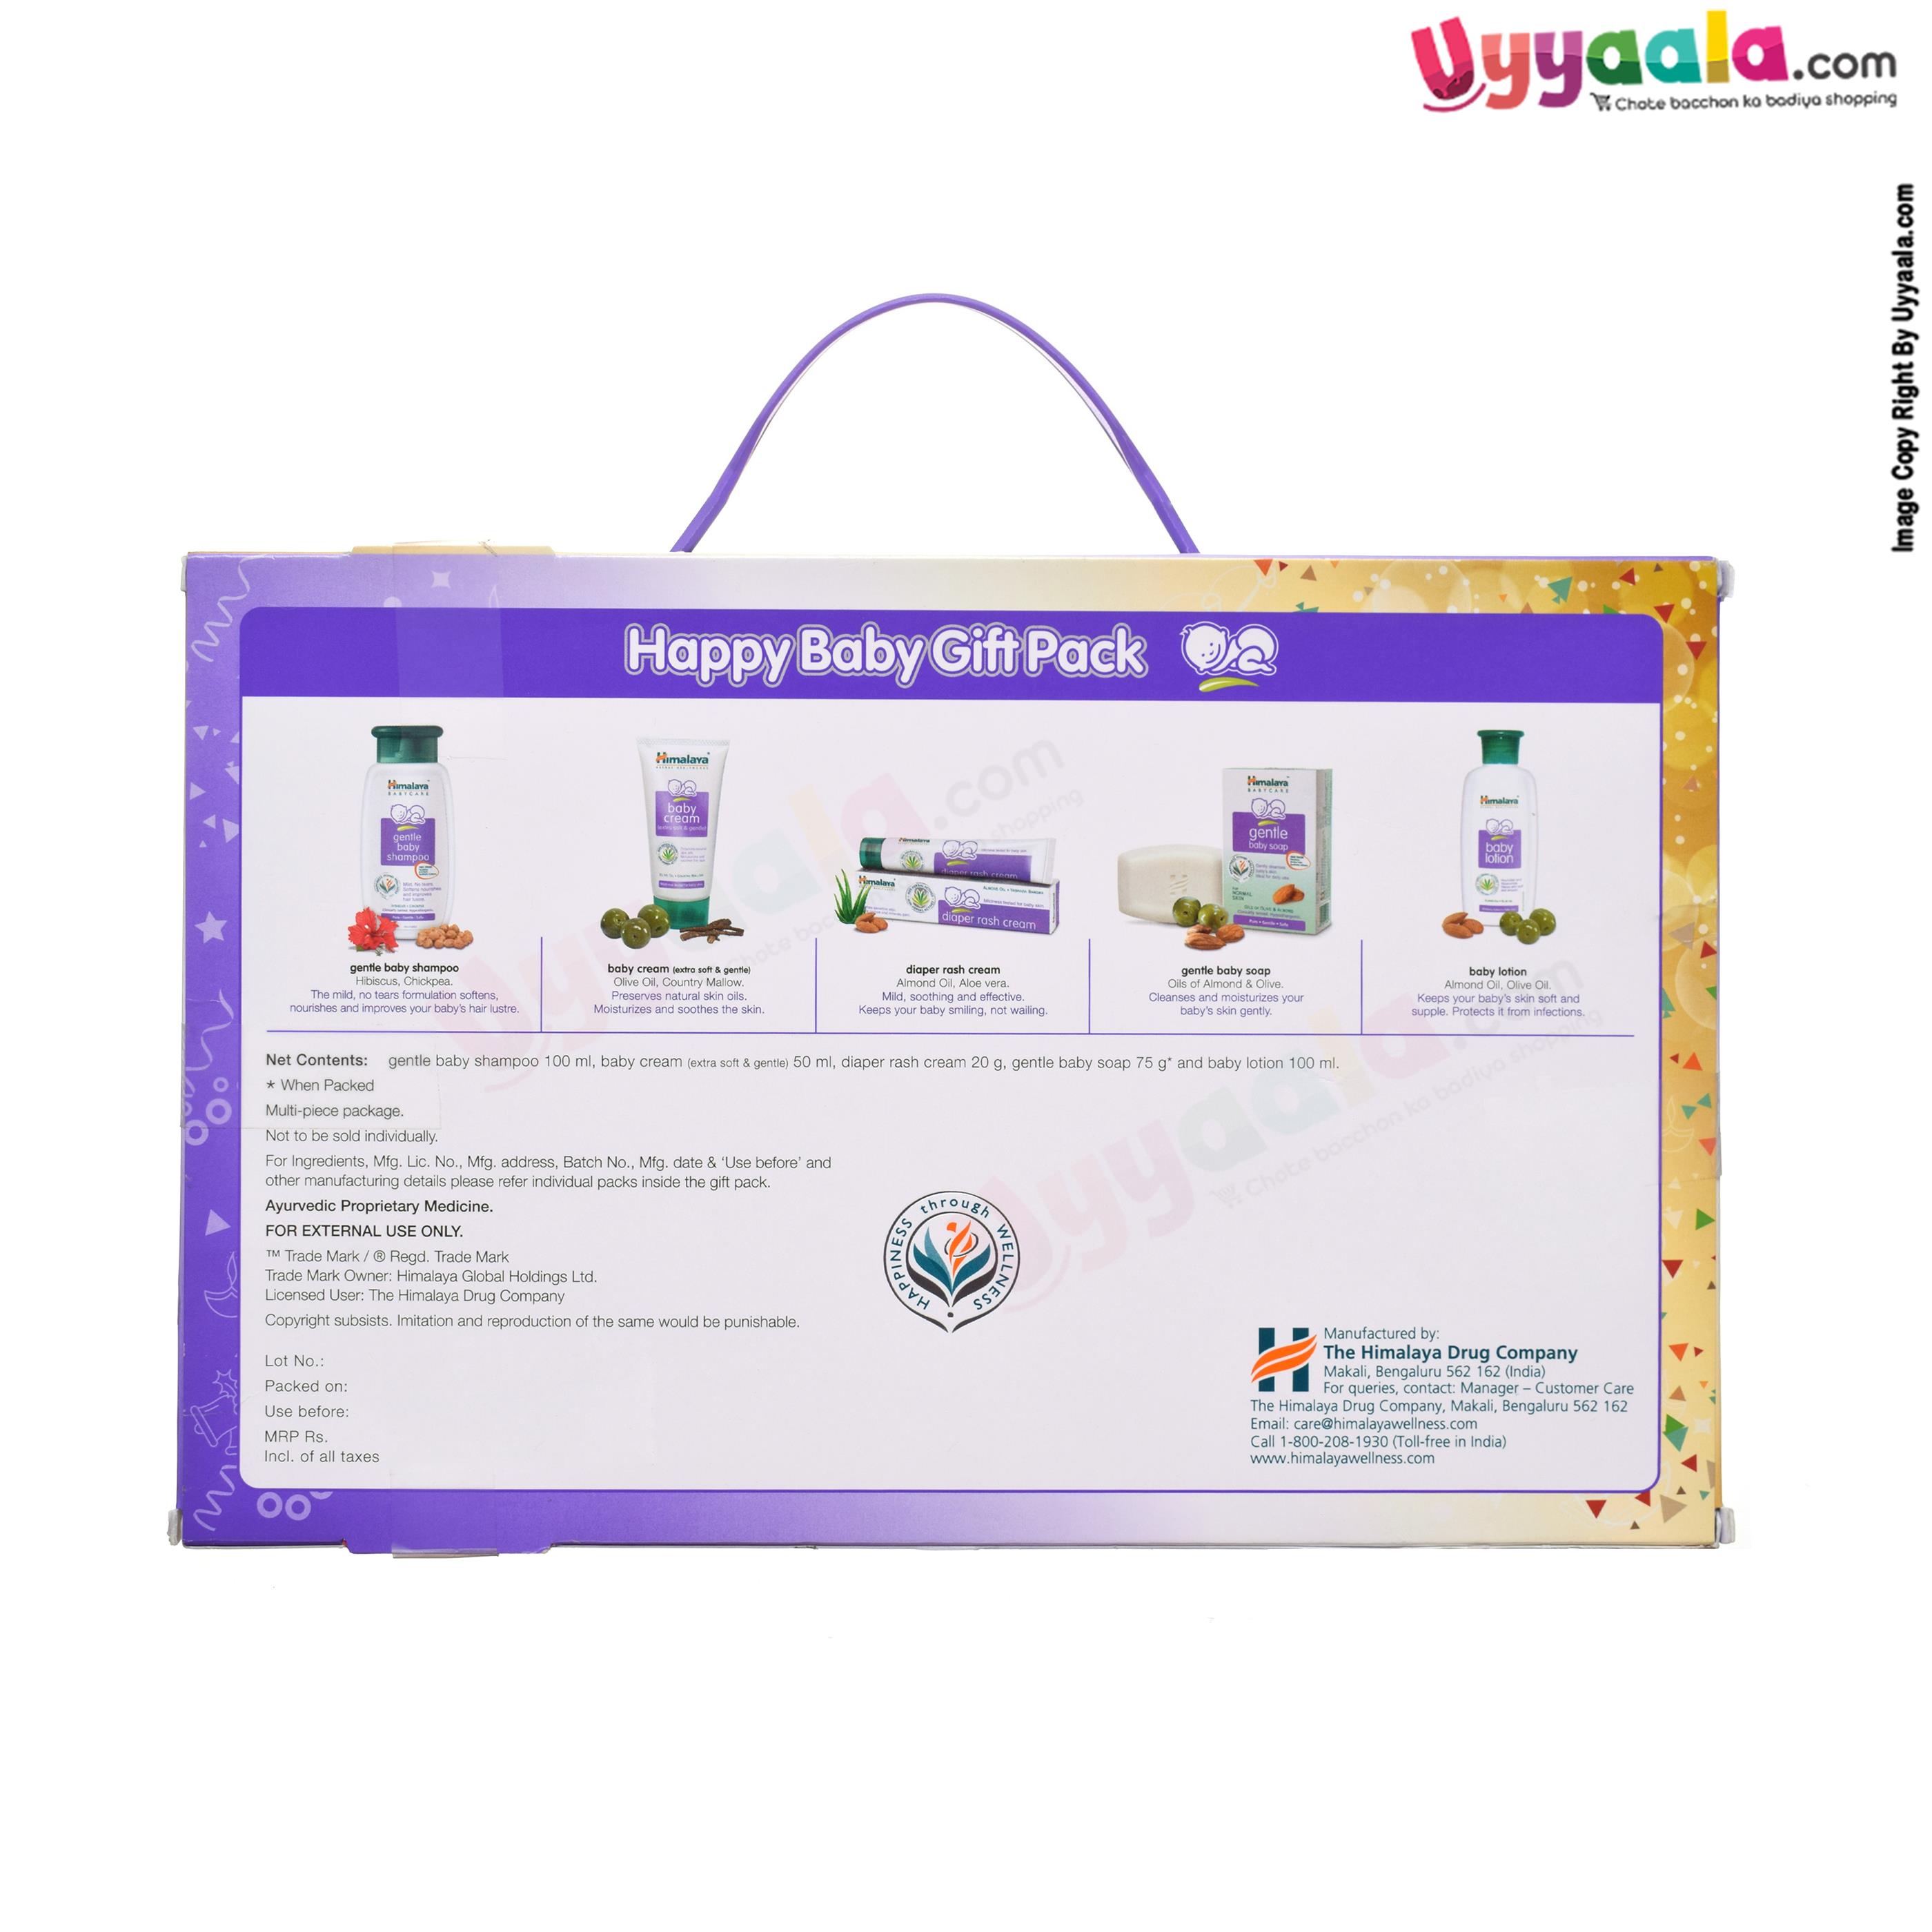 Gift pack for babies